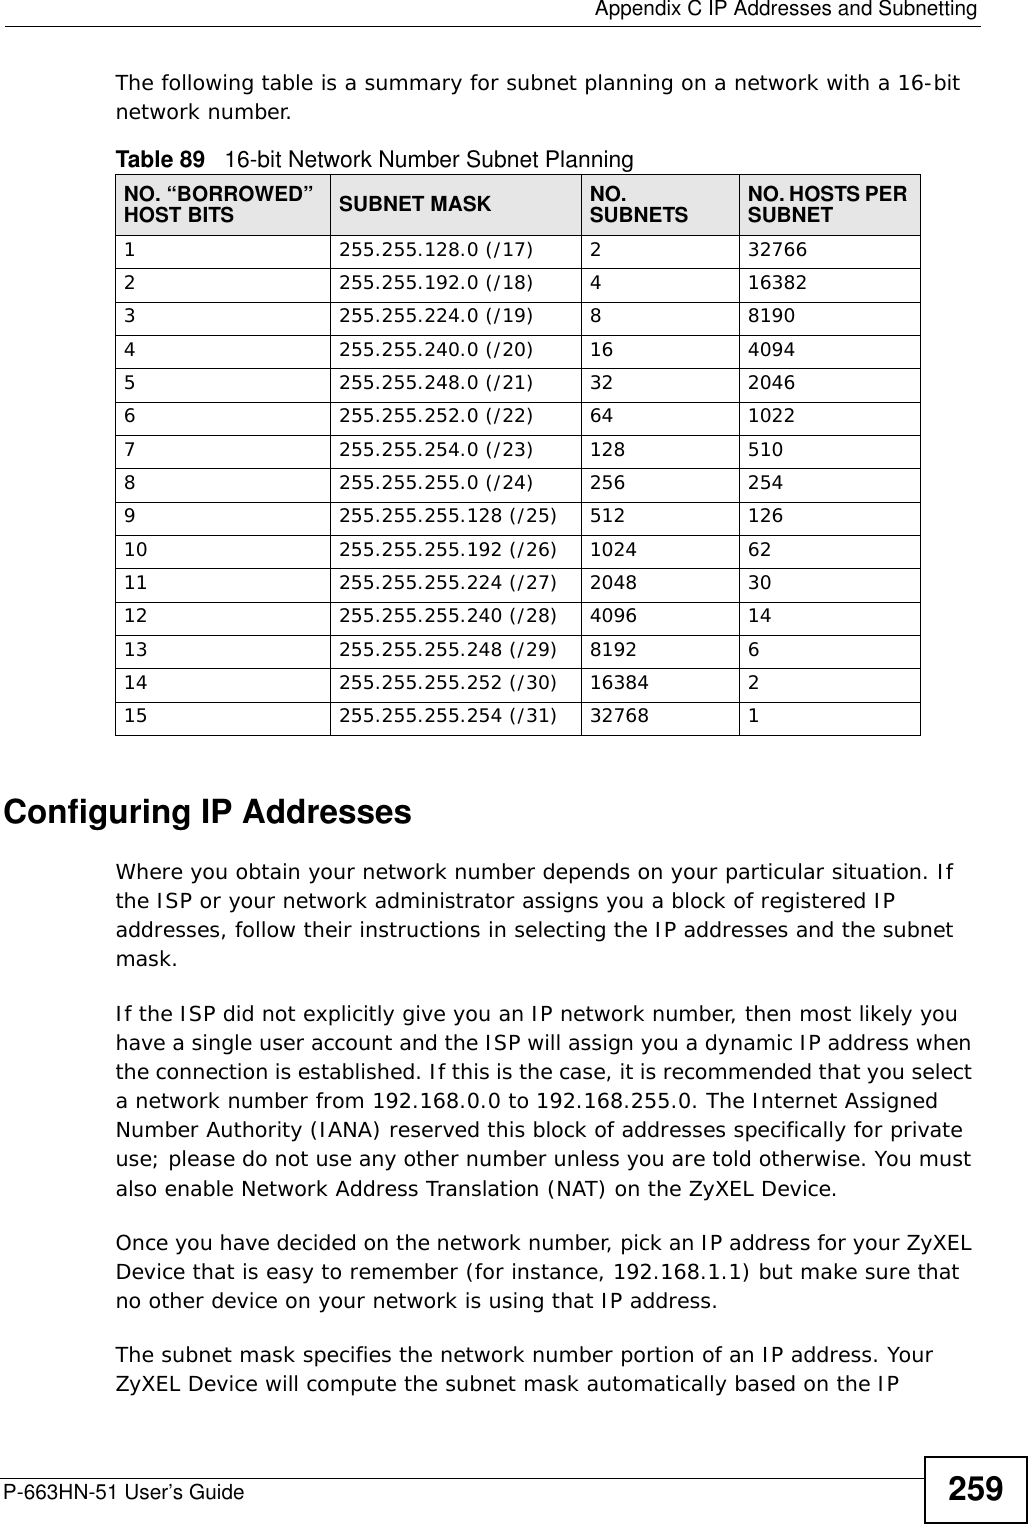  Appendix C IP Addresses and SubnettingP-663HN-51 User’s Guide 259The following table is a summary for subnet planning on a network with a 16-bit network number. Configuring IP AddressesWhere you obtain your network number depends on your particular situation. If the ISP or your network administrator assigns you a block of registered IP addresses, follow their instructions in selecting the IP addresses and the subnet mask.If the ISP did not explicitly give you an IP network number, then most likely you have a single user account and the ISP will assign you a dynamic IP address when the connection is established. If this is the case, it is recommended that you select a network number from 192.168.0.0 to 192.168.255.0. The Internet Assigned Number Authority (IANA) reserved this block of addresses specifically for private use; please do not use any other number unless you are told otherwise. You must also enable Network Address Translation (NAT) on the ZyXEL Device. Once you have decided on the network number, pick an IP address for your ZyXEL Device that is easy to remember (for instance, 192.168.1.1) but make sure that no other device on your network is using that IP address.The subnet mask specifies the network number portion of an IP address. Your ZyXEL Device will compute the subnet mask automatically based on the IP Table 89   16-bit Network Number Subnet PlanningNO. “BORROWED” HOST BITS SUBNET MASK NO. SUBNETS NO. HOSTS PER SUBNET1255.255.128.0 (/17) 2327662255.255.192.0 (/18) 4163823255.255.224.0 (/19) 881904255.255.240.0 (/20) 16 40945255.255.248.0 (/21) 32 20466255.255.252.0 (/22) 64 10227255.255.254.0 (/23) 128 5108255.255.255.0 (/24) 256 2549255.255.255.128 (/25) 512 12610 255.255.255.192 (/26) 1024 6211 255.255.255.224 (/27) 2048 3012 255.255.255.240 (/28) 4096 1413 255.255.255.248 (/29) 8192 614 255.255.255.252 (/30) 16384 215 255.255.255.254 (/31) 32768 1